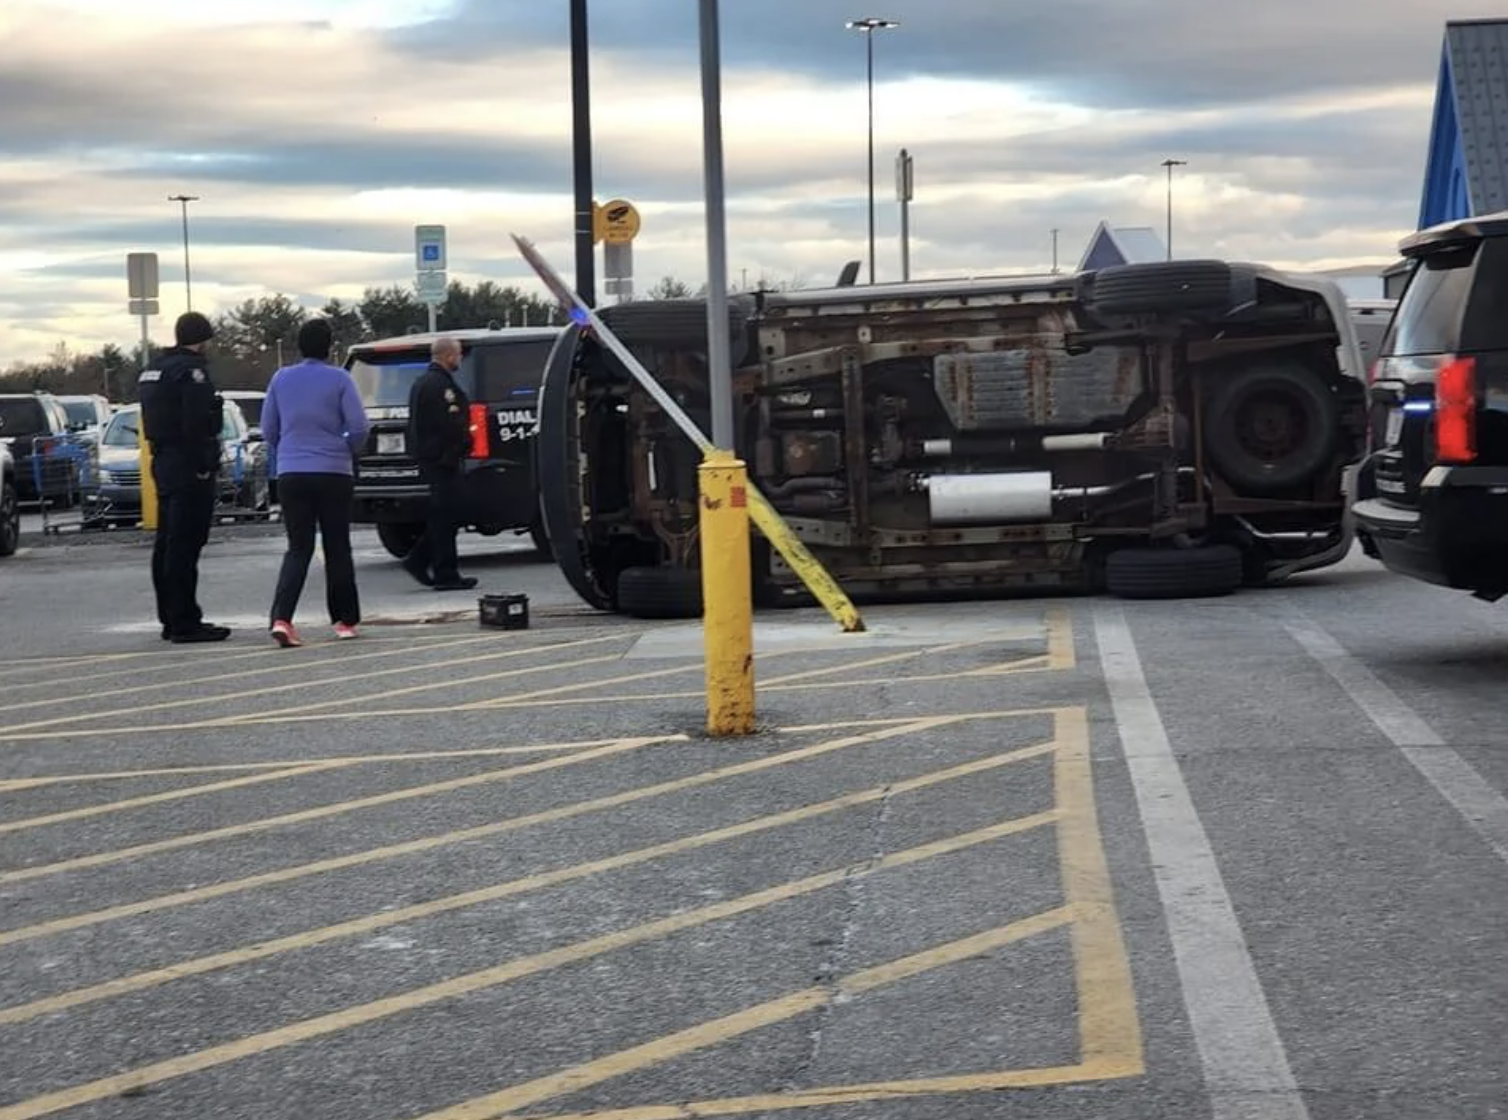 The Walmart Parking Lot Pole That People Just Can't Stop Crashing Into